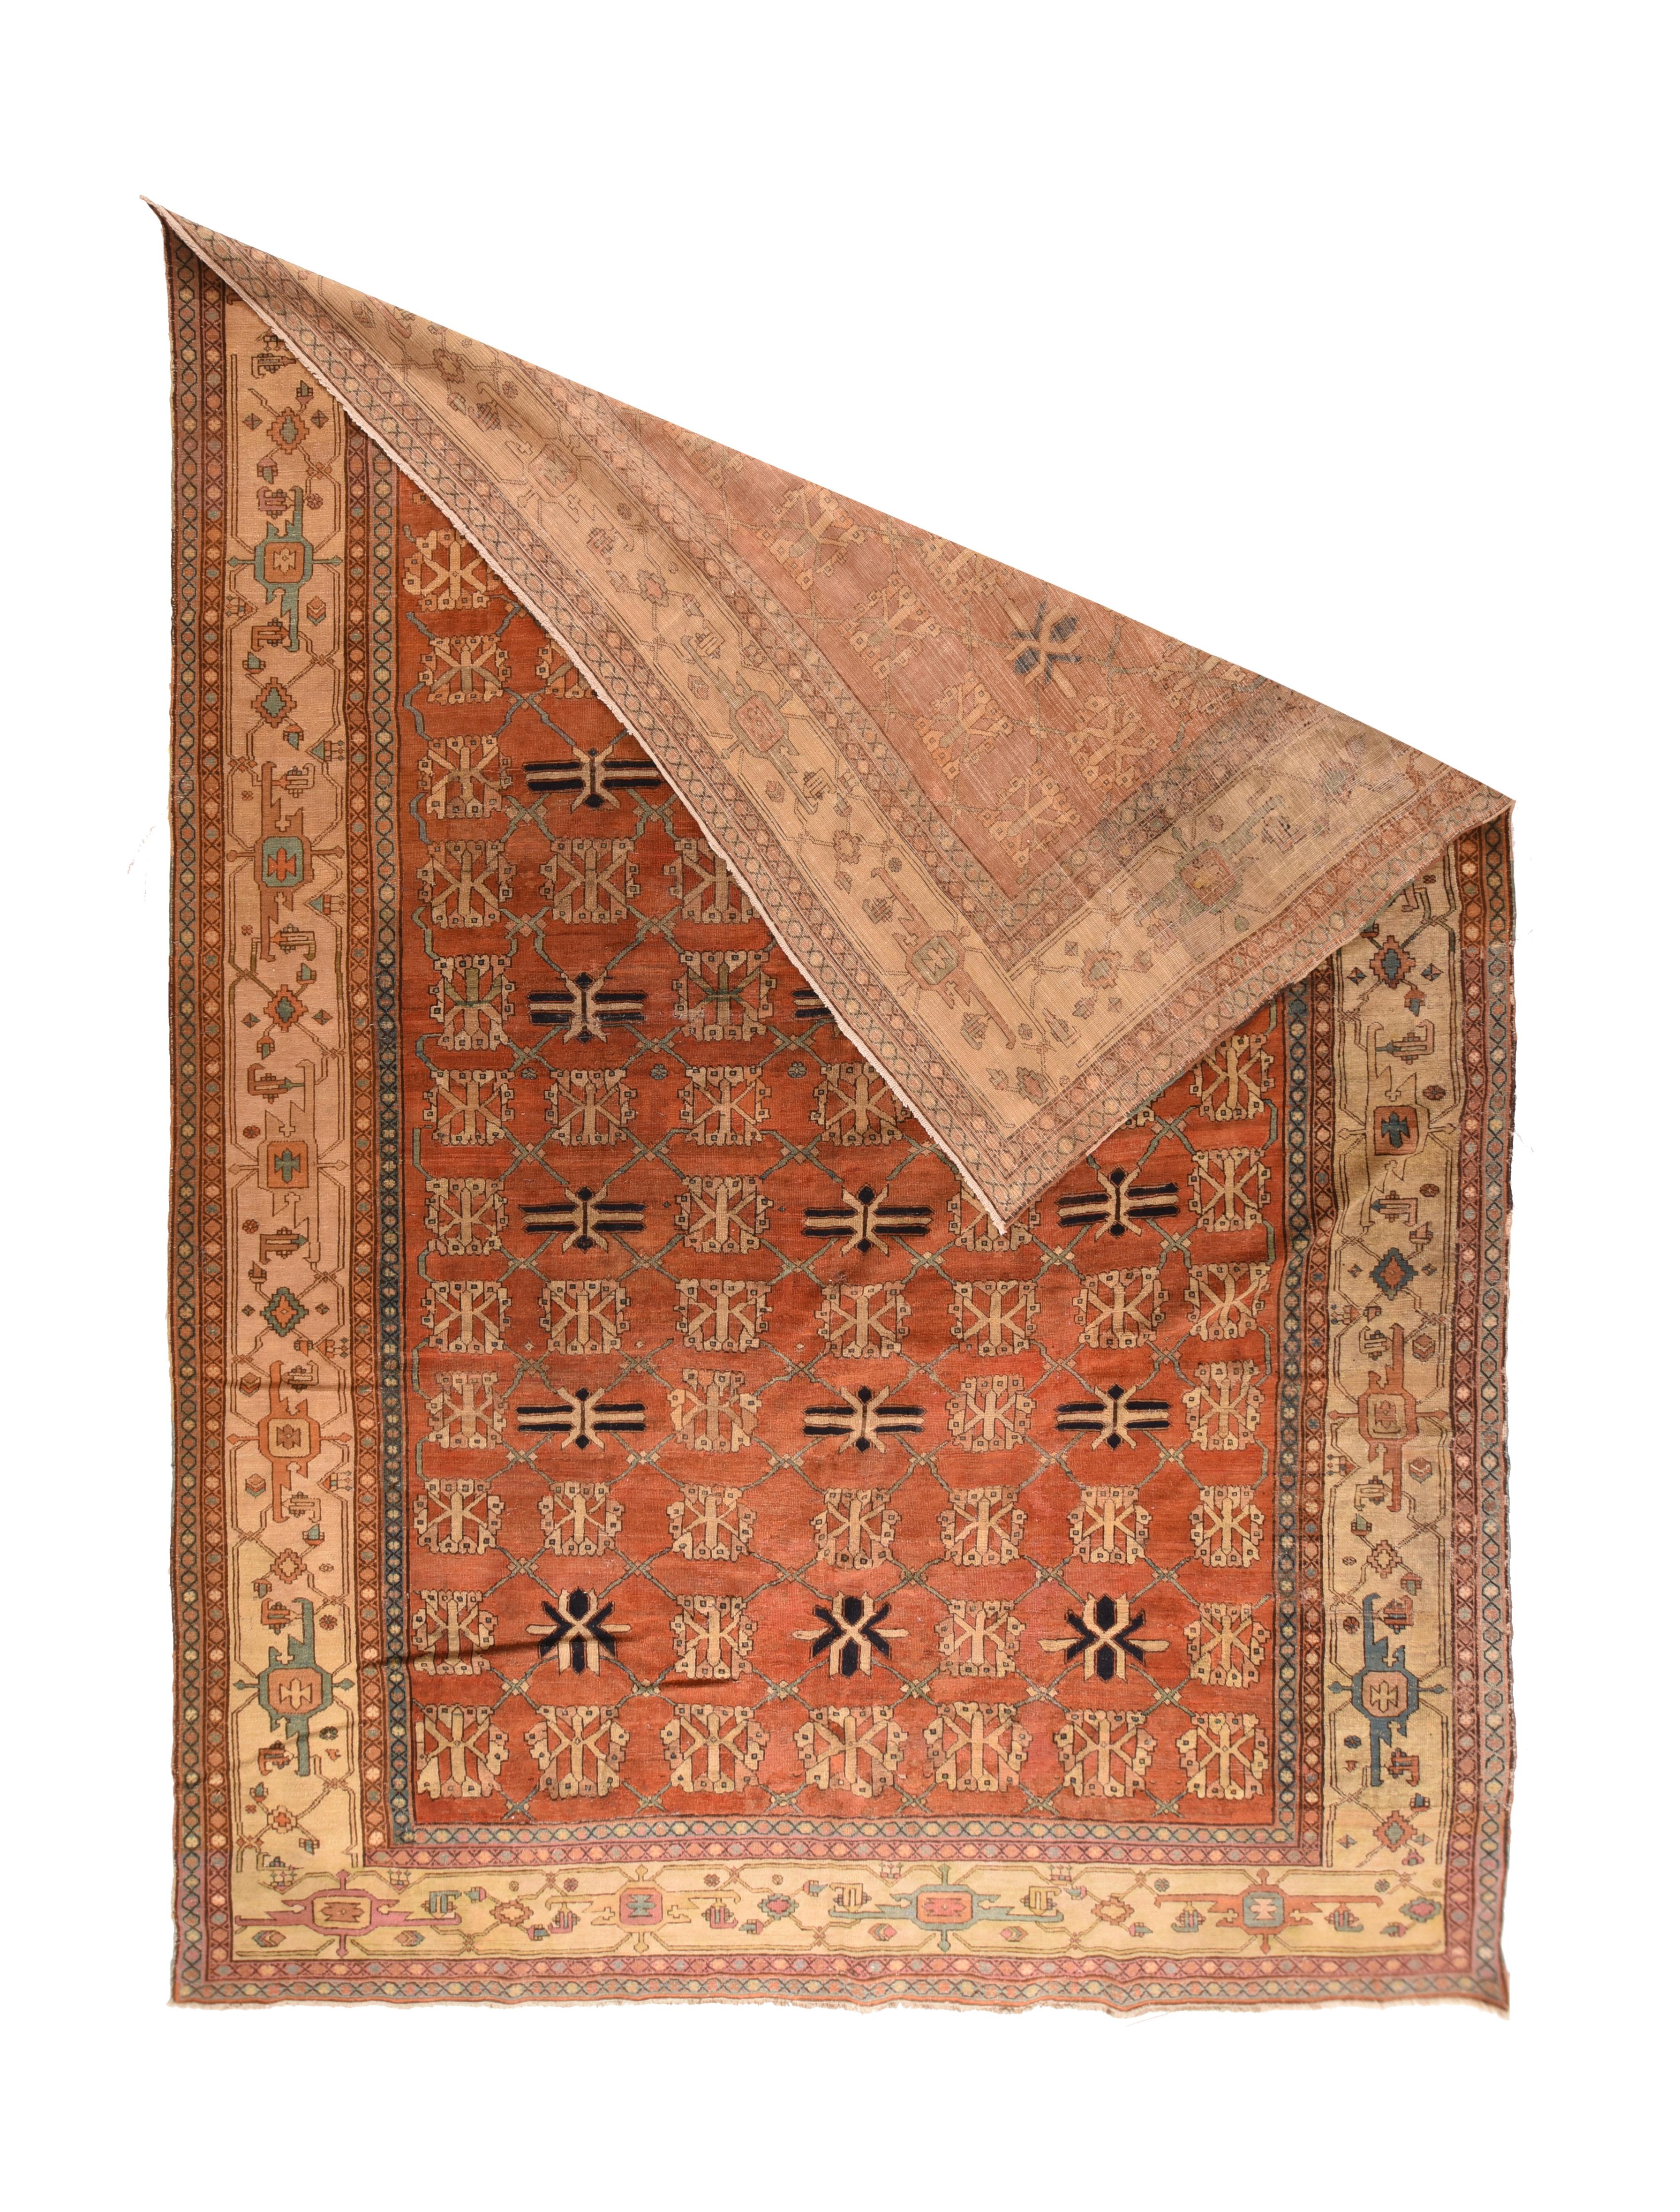 The rust field of this rustic Central Asian piece shows a seven by thirteen arrangement of repeating stylized flowers and guls accented in straw and black. The darker detailed guls are in every second row.The strip style straw-cream border is in the